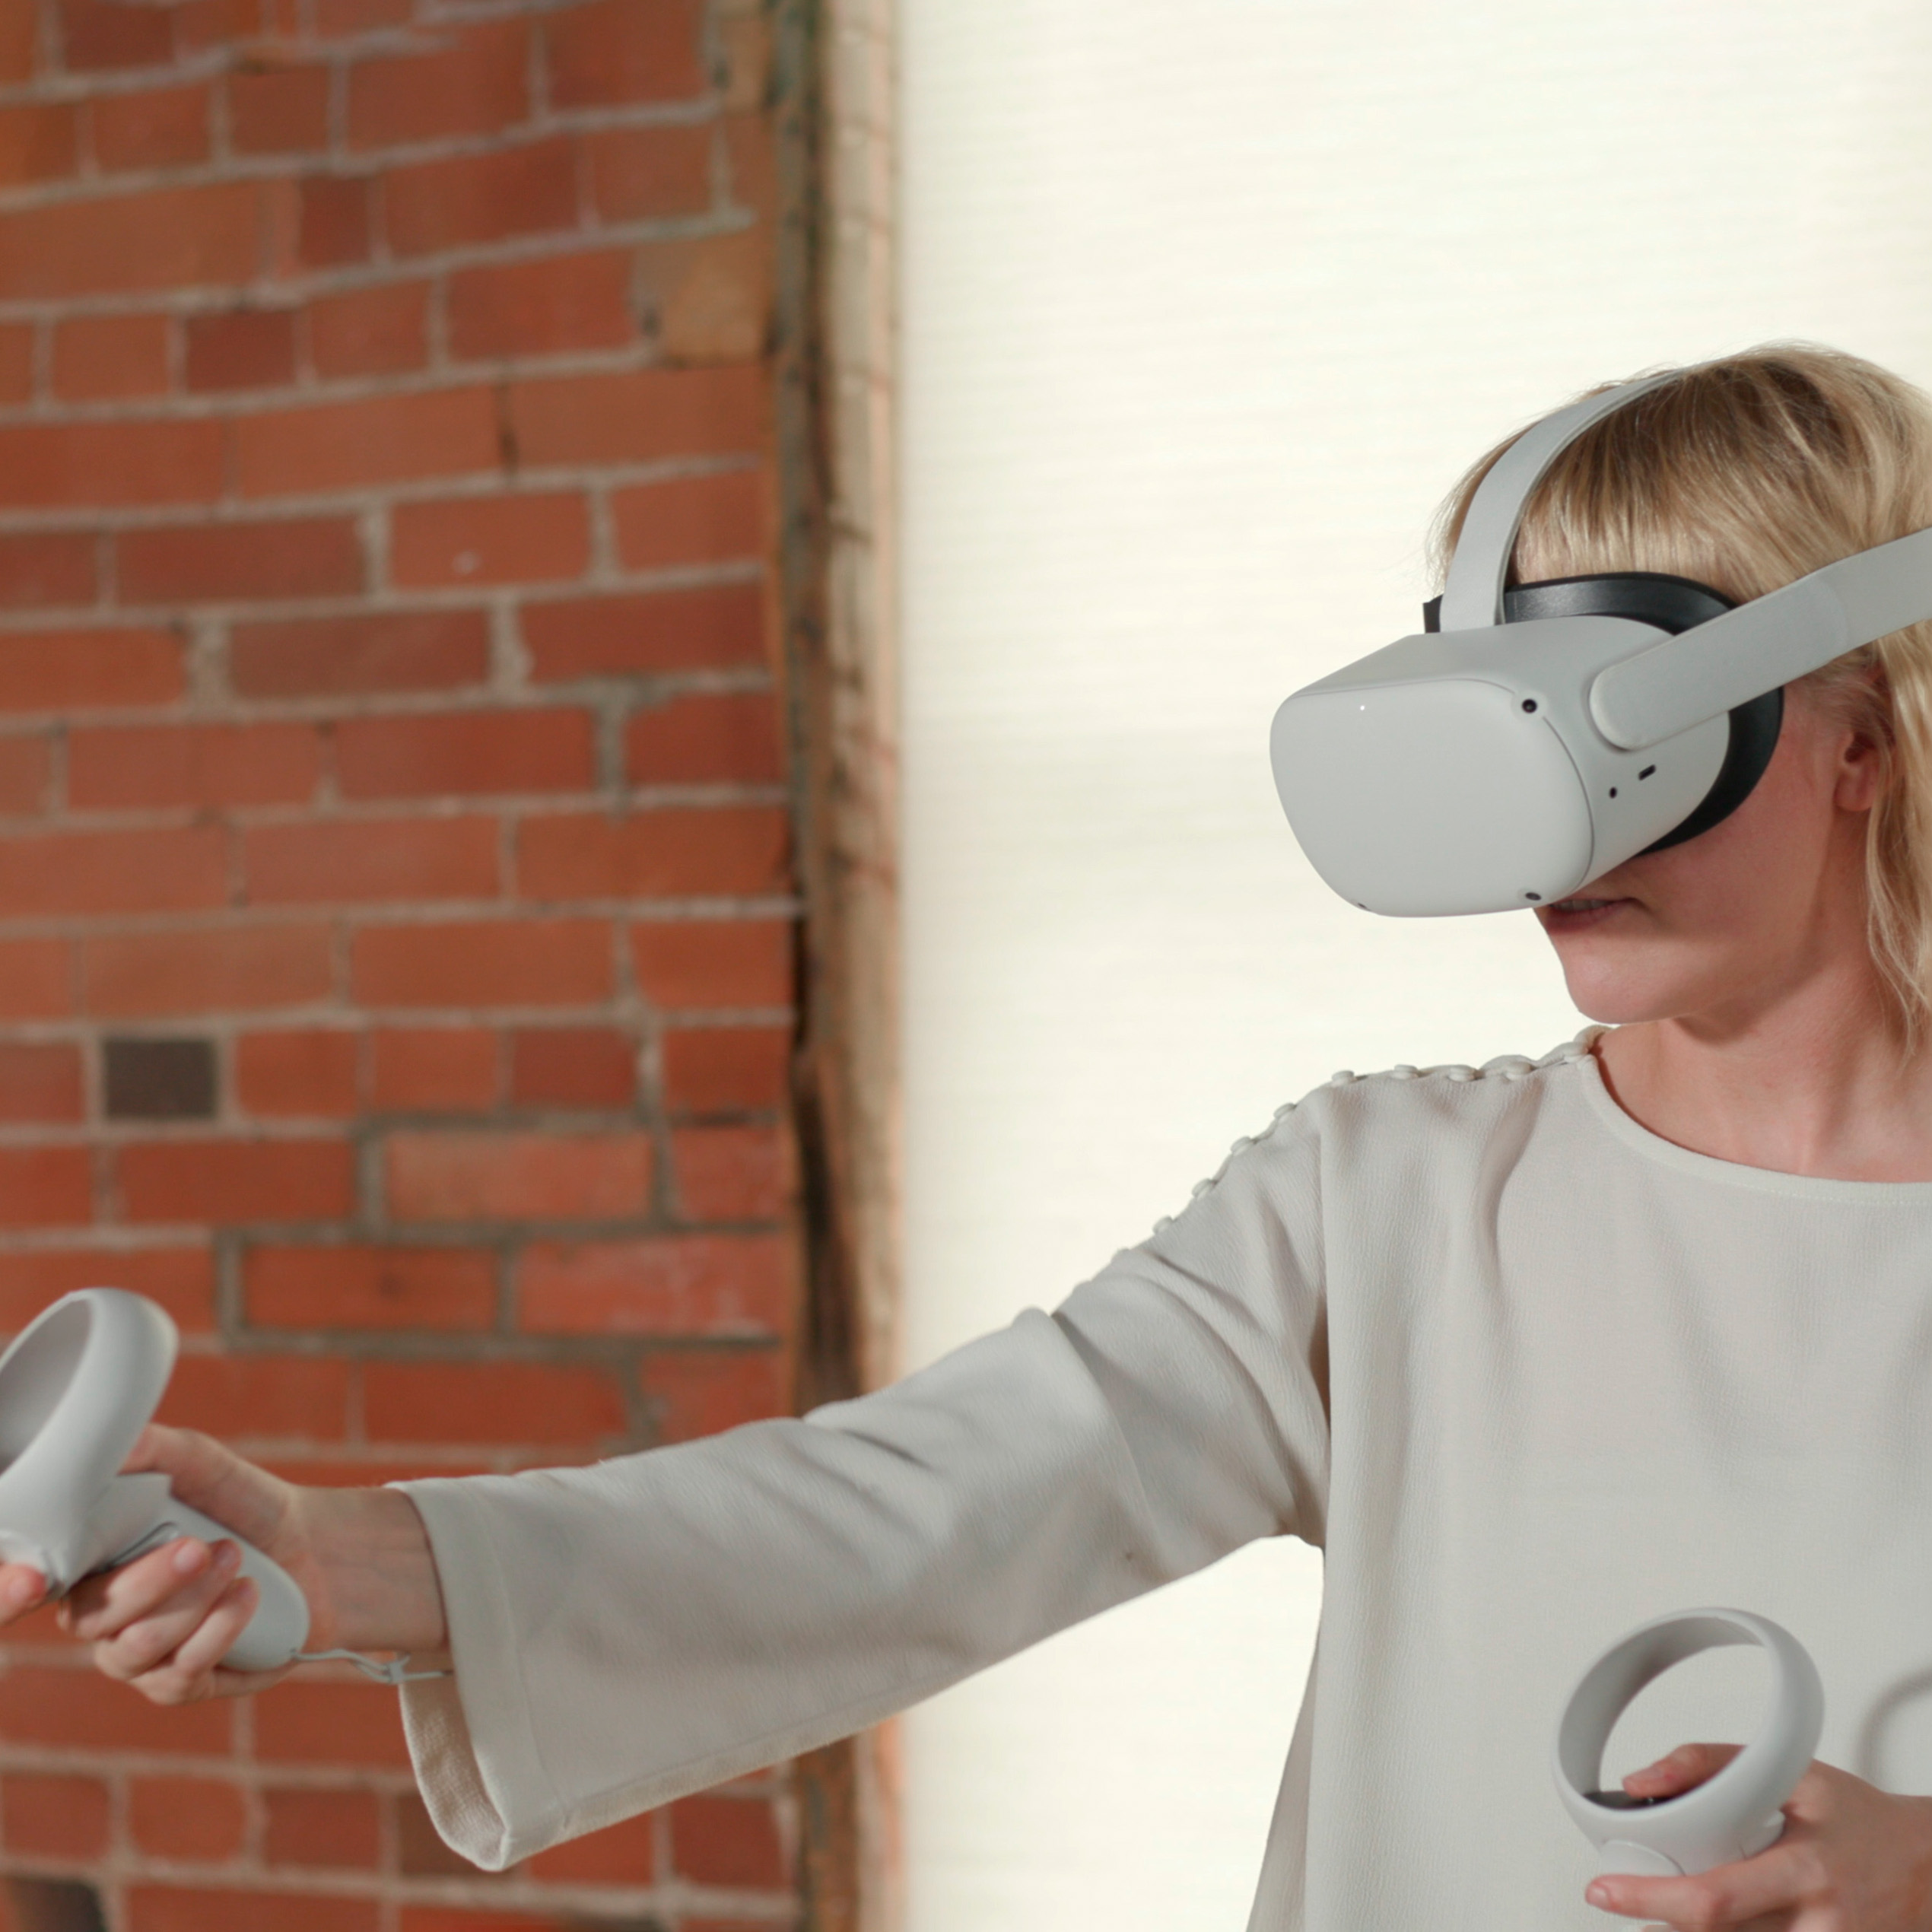 Connect with customers using the power of virtual reality